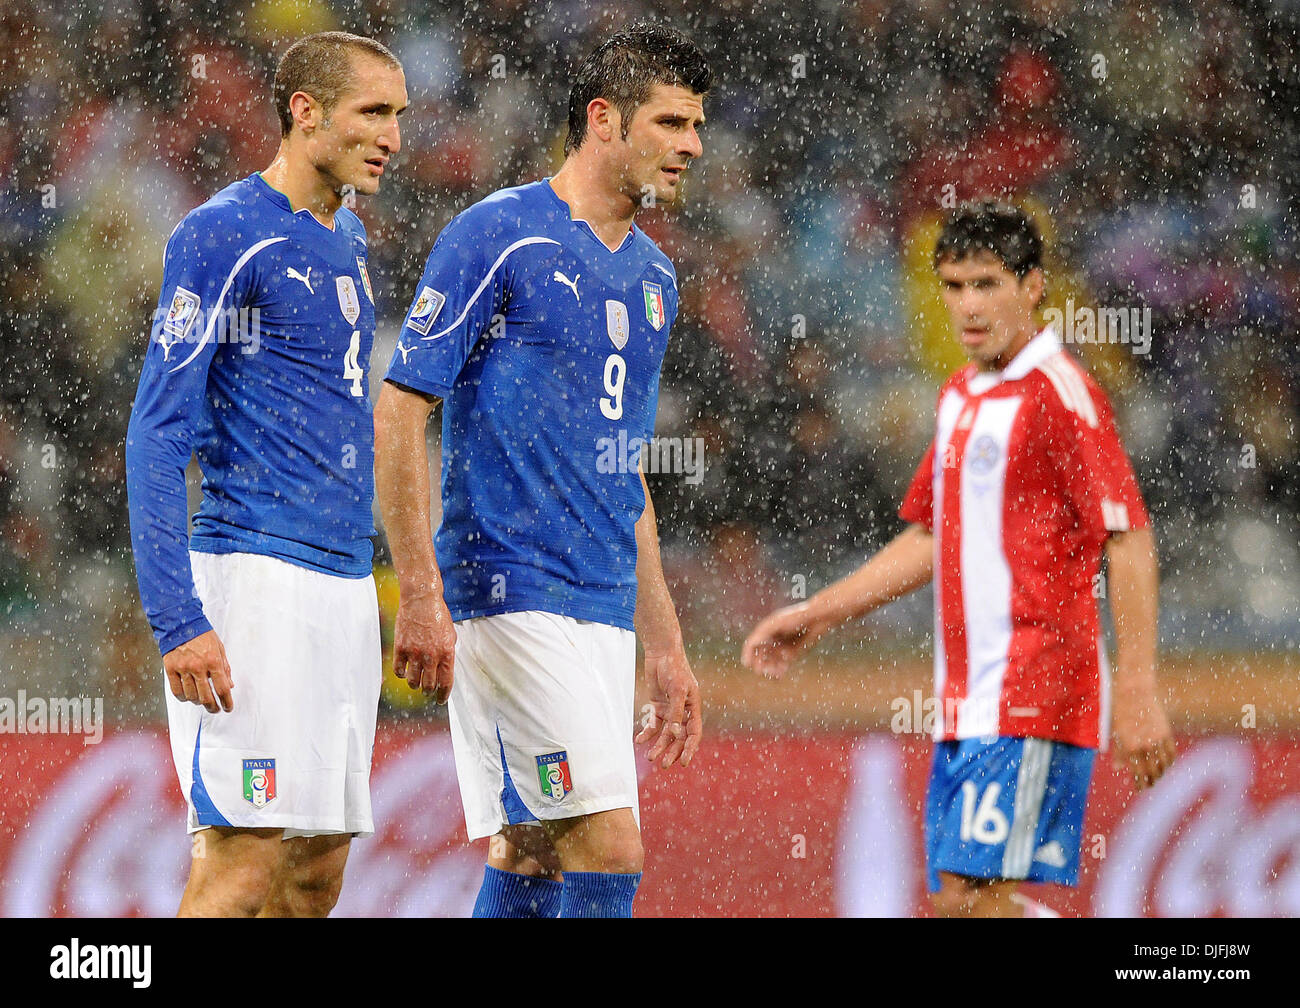 Jun 14, 2010 - Cape Town, South Africa - GIORGIO CHIELLINI and VINCENZO IAQUINTA of Italy during the FIFA World Cup 2010 soccer match between Italy and Paraguay at the Green Point Stadium. (Credit Image: © Luca Ghidoni/ZUMApress.com) Stock Photo